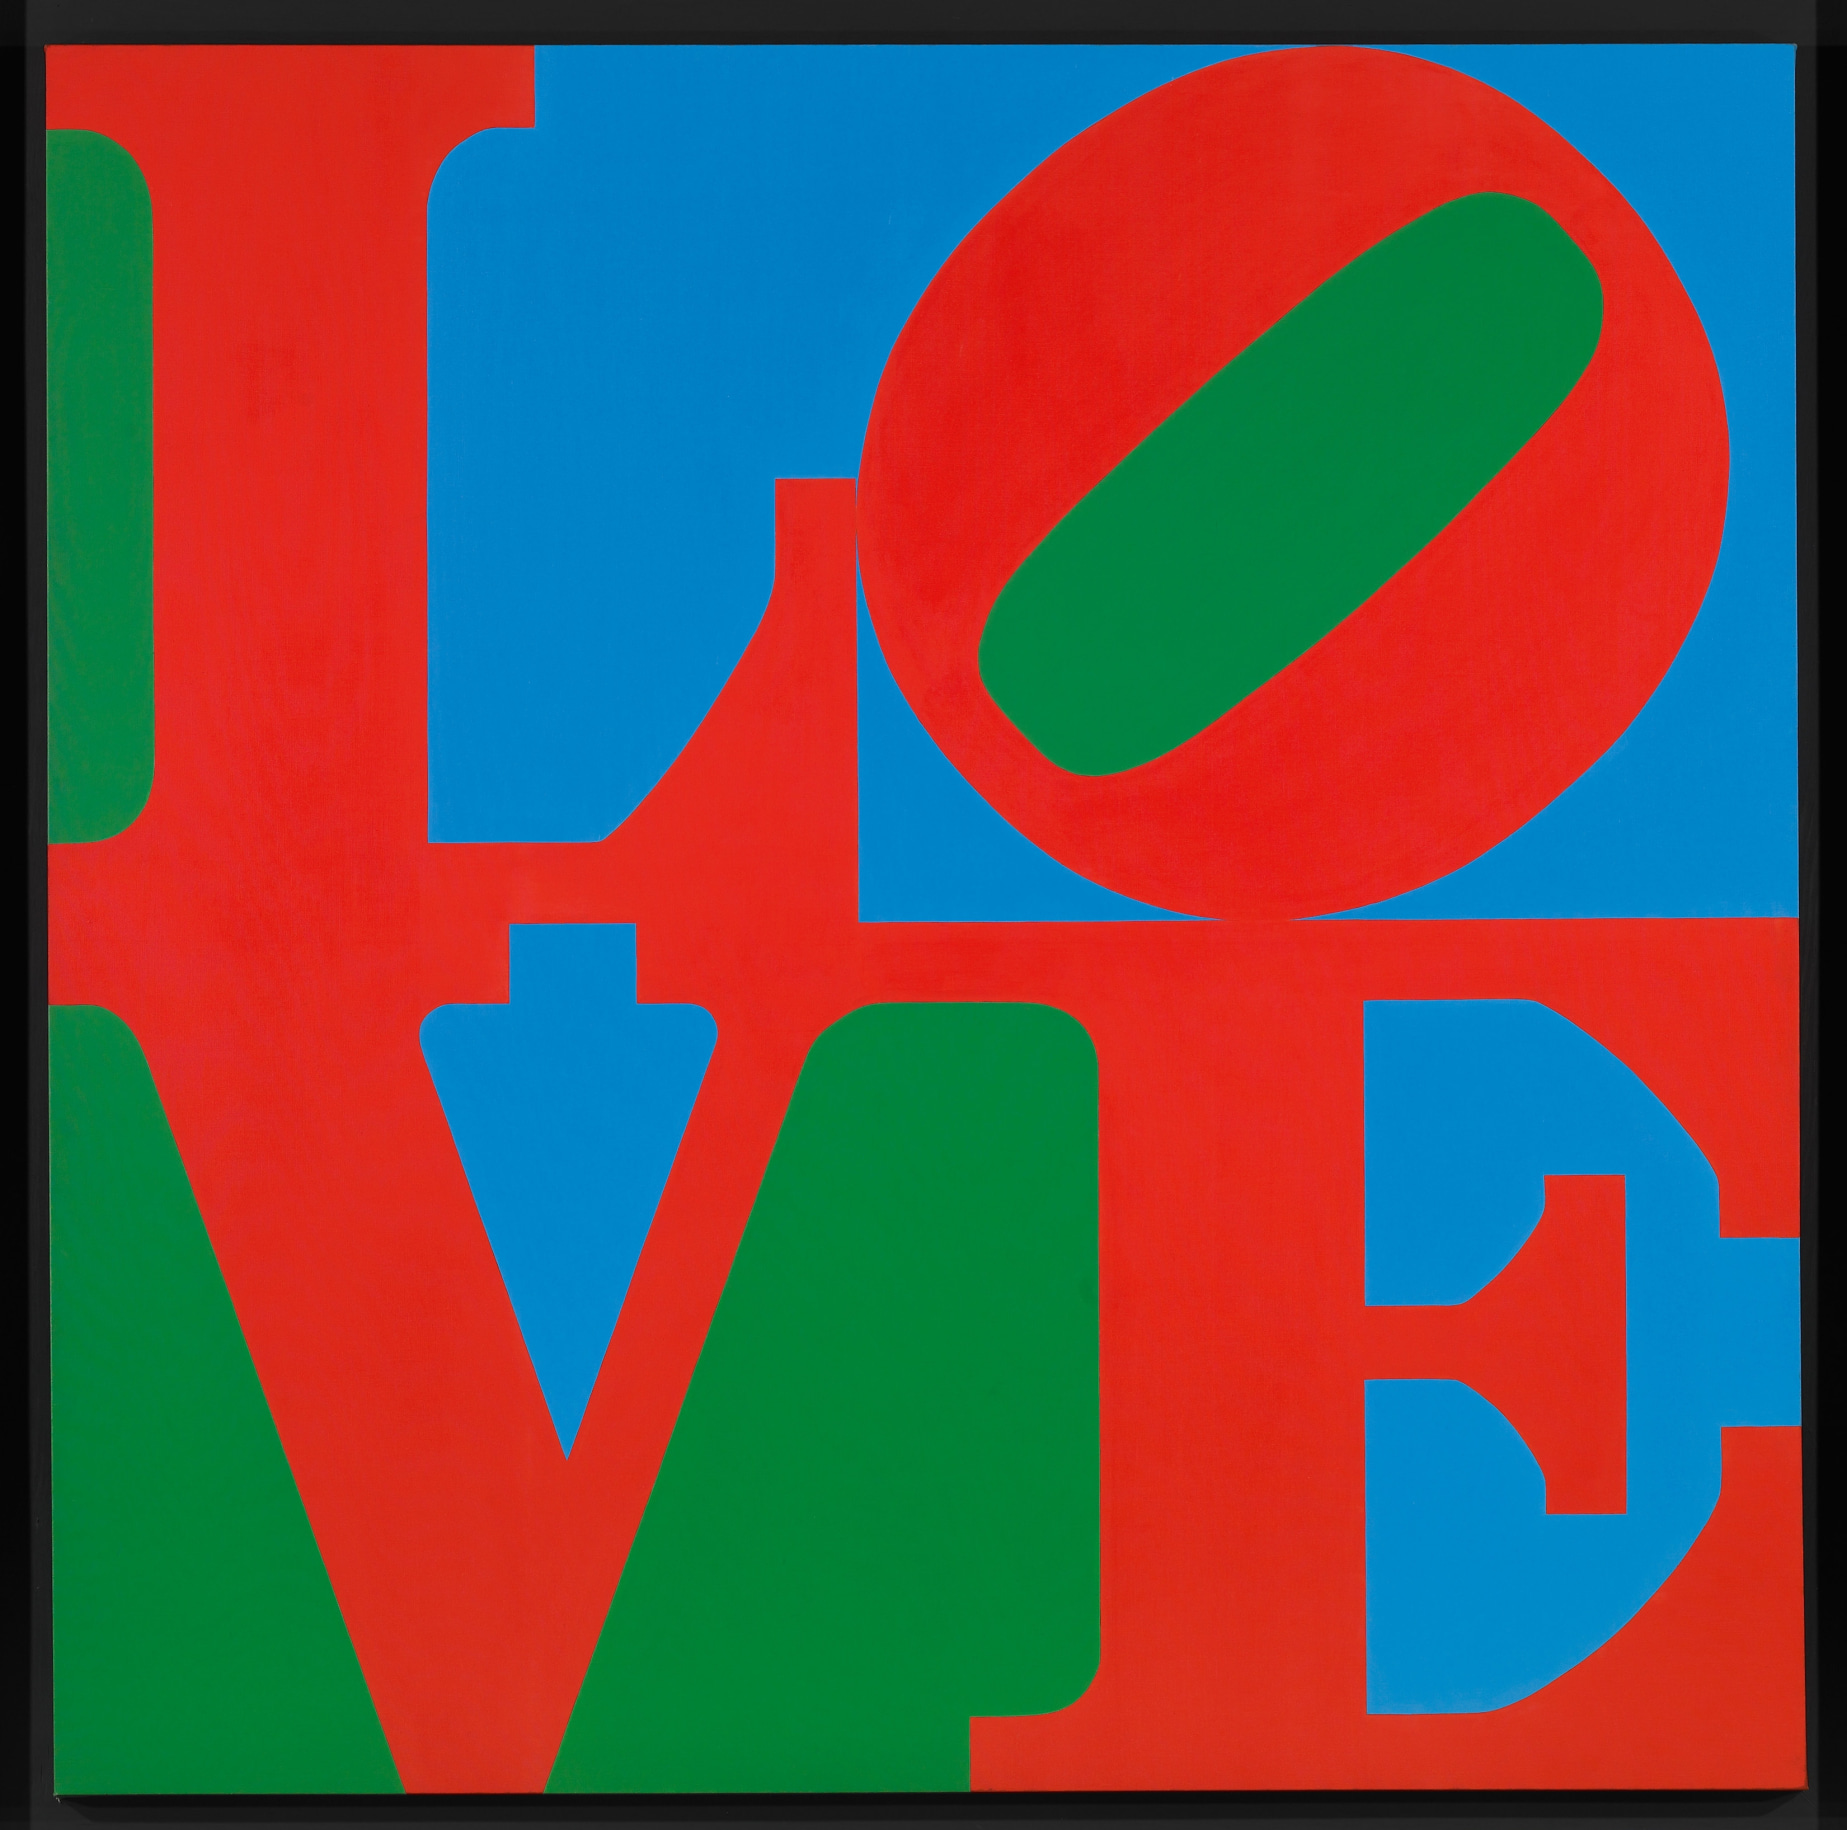 LOVE is a 72 inch square painting with the red letters L and a tilted O stacked above the letters V and E, against a green and blue background.